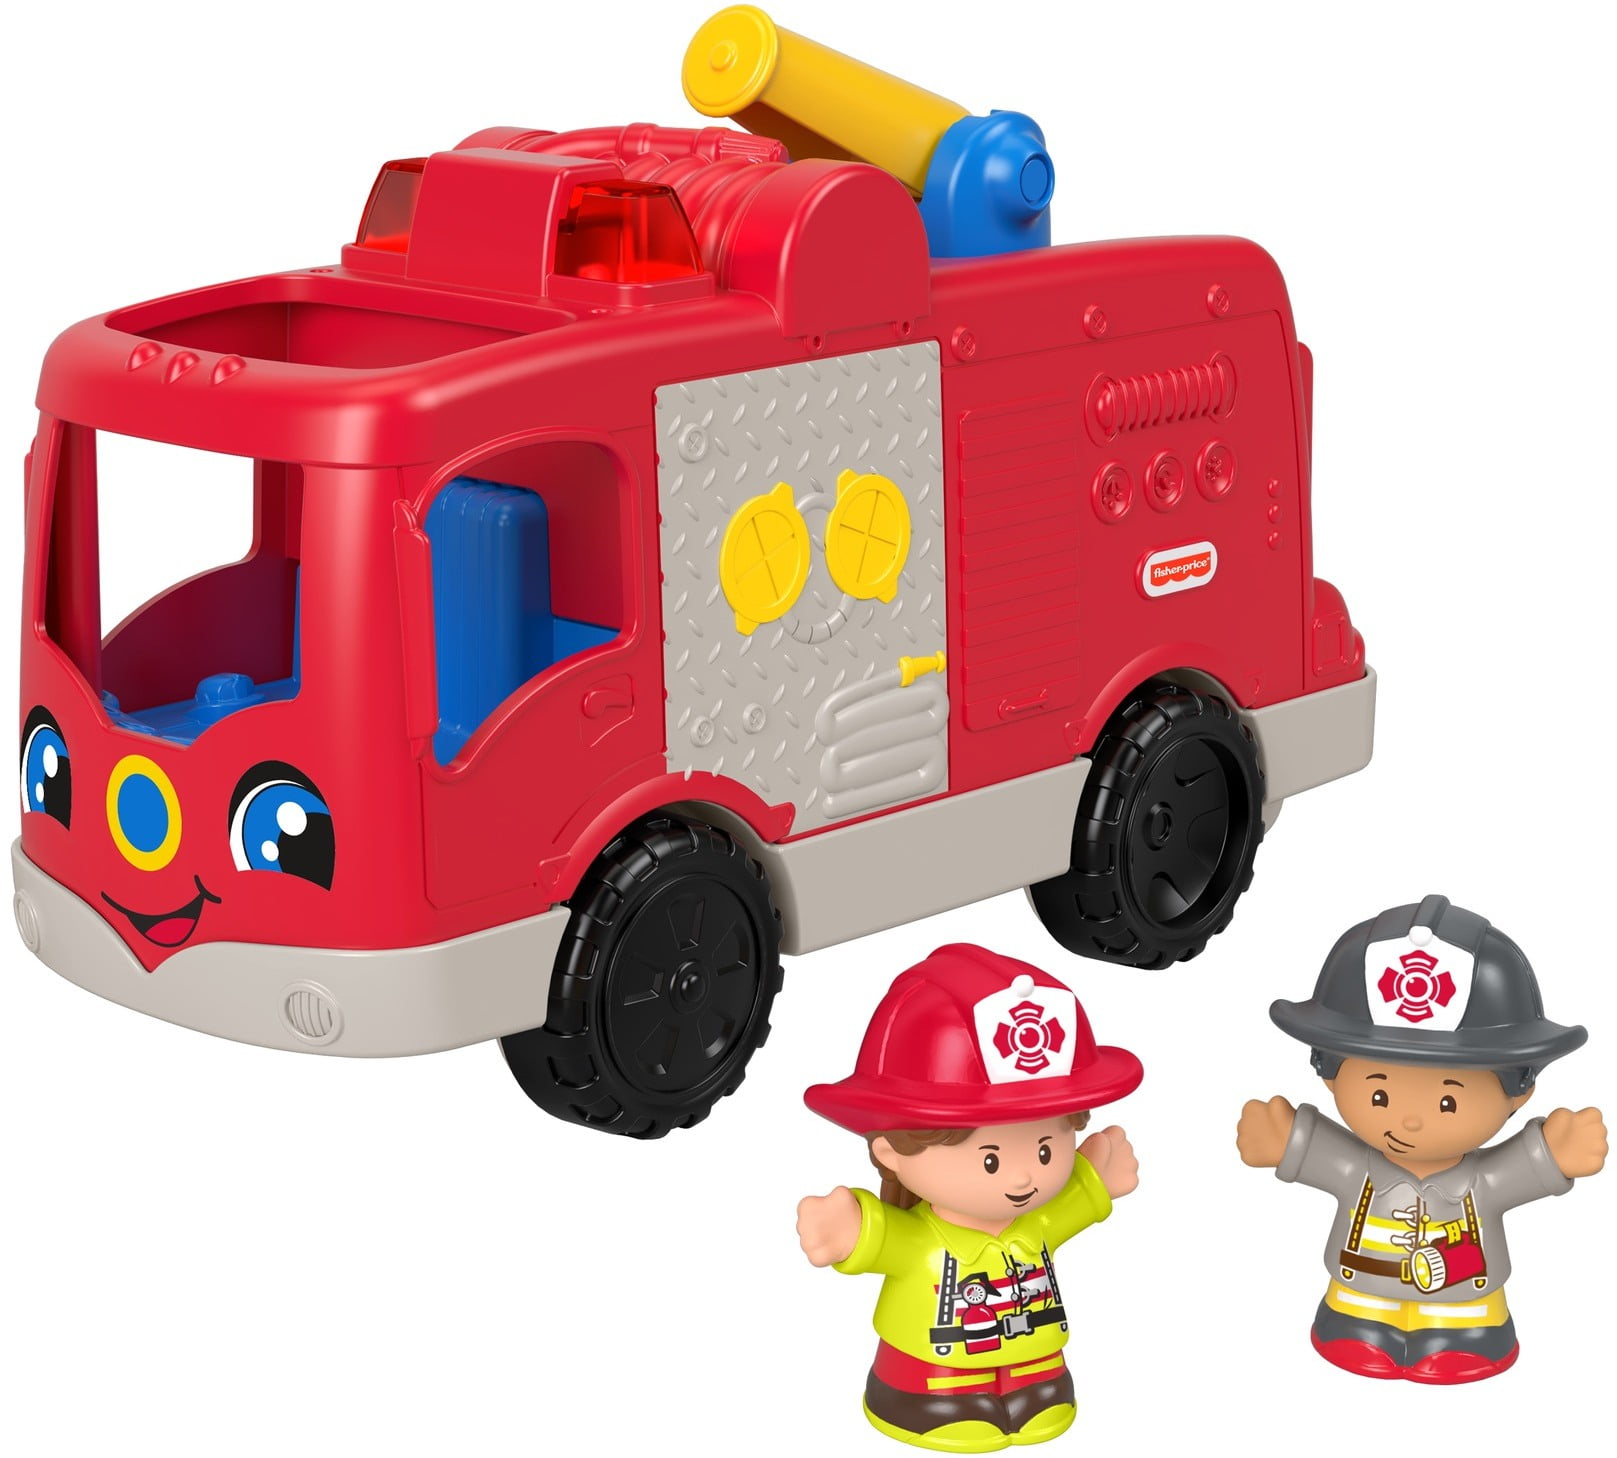 Fisher-Price FPV29 Helping Others Fire Truck Toy With Sounds and Figure 